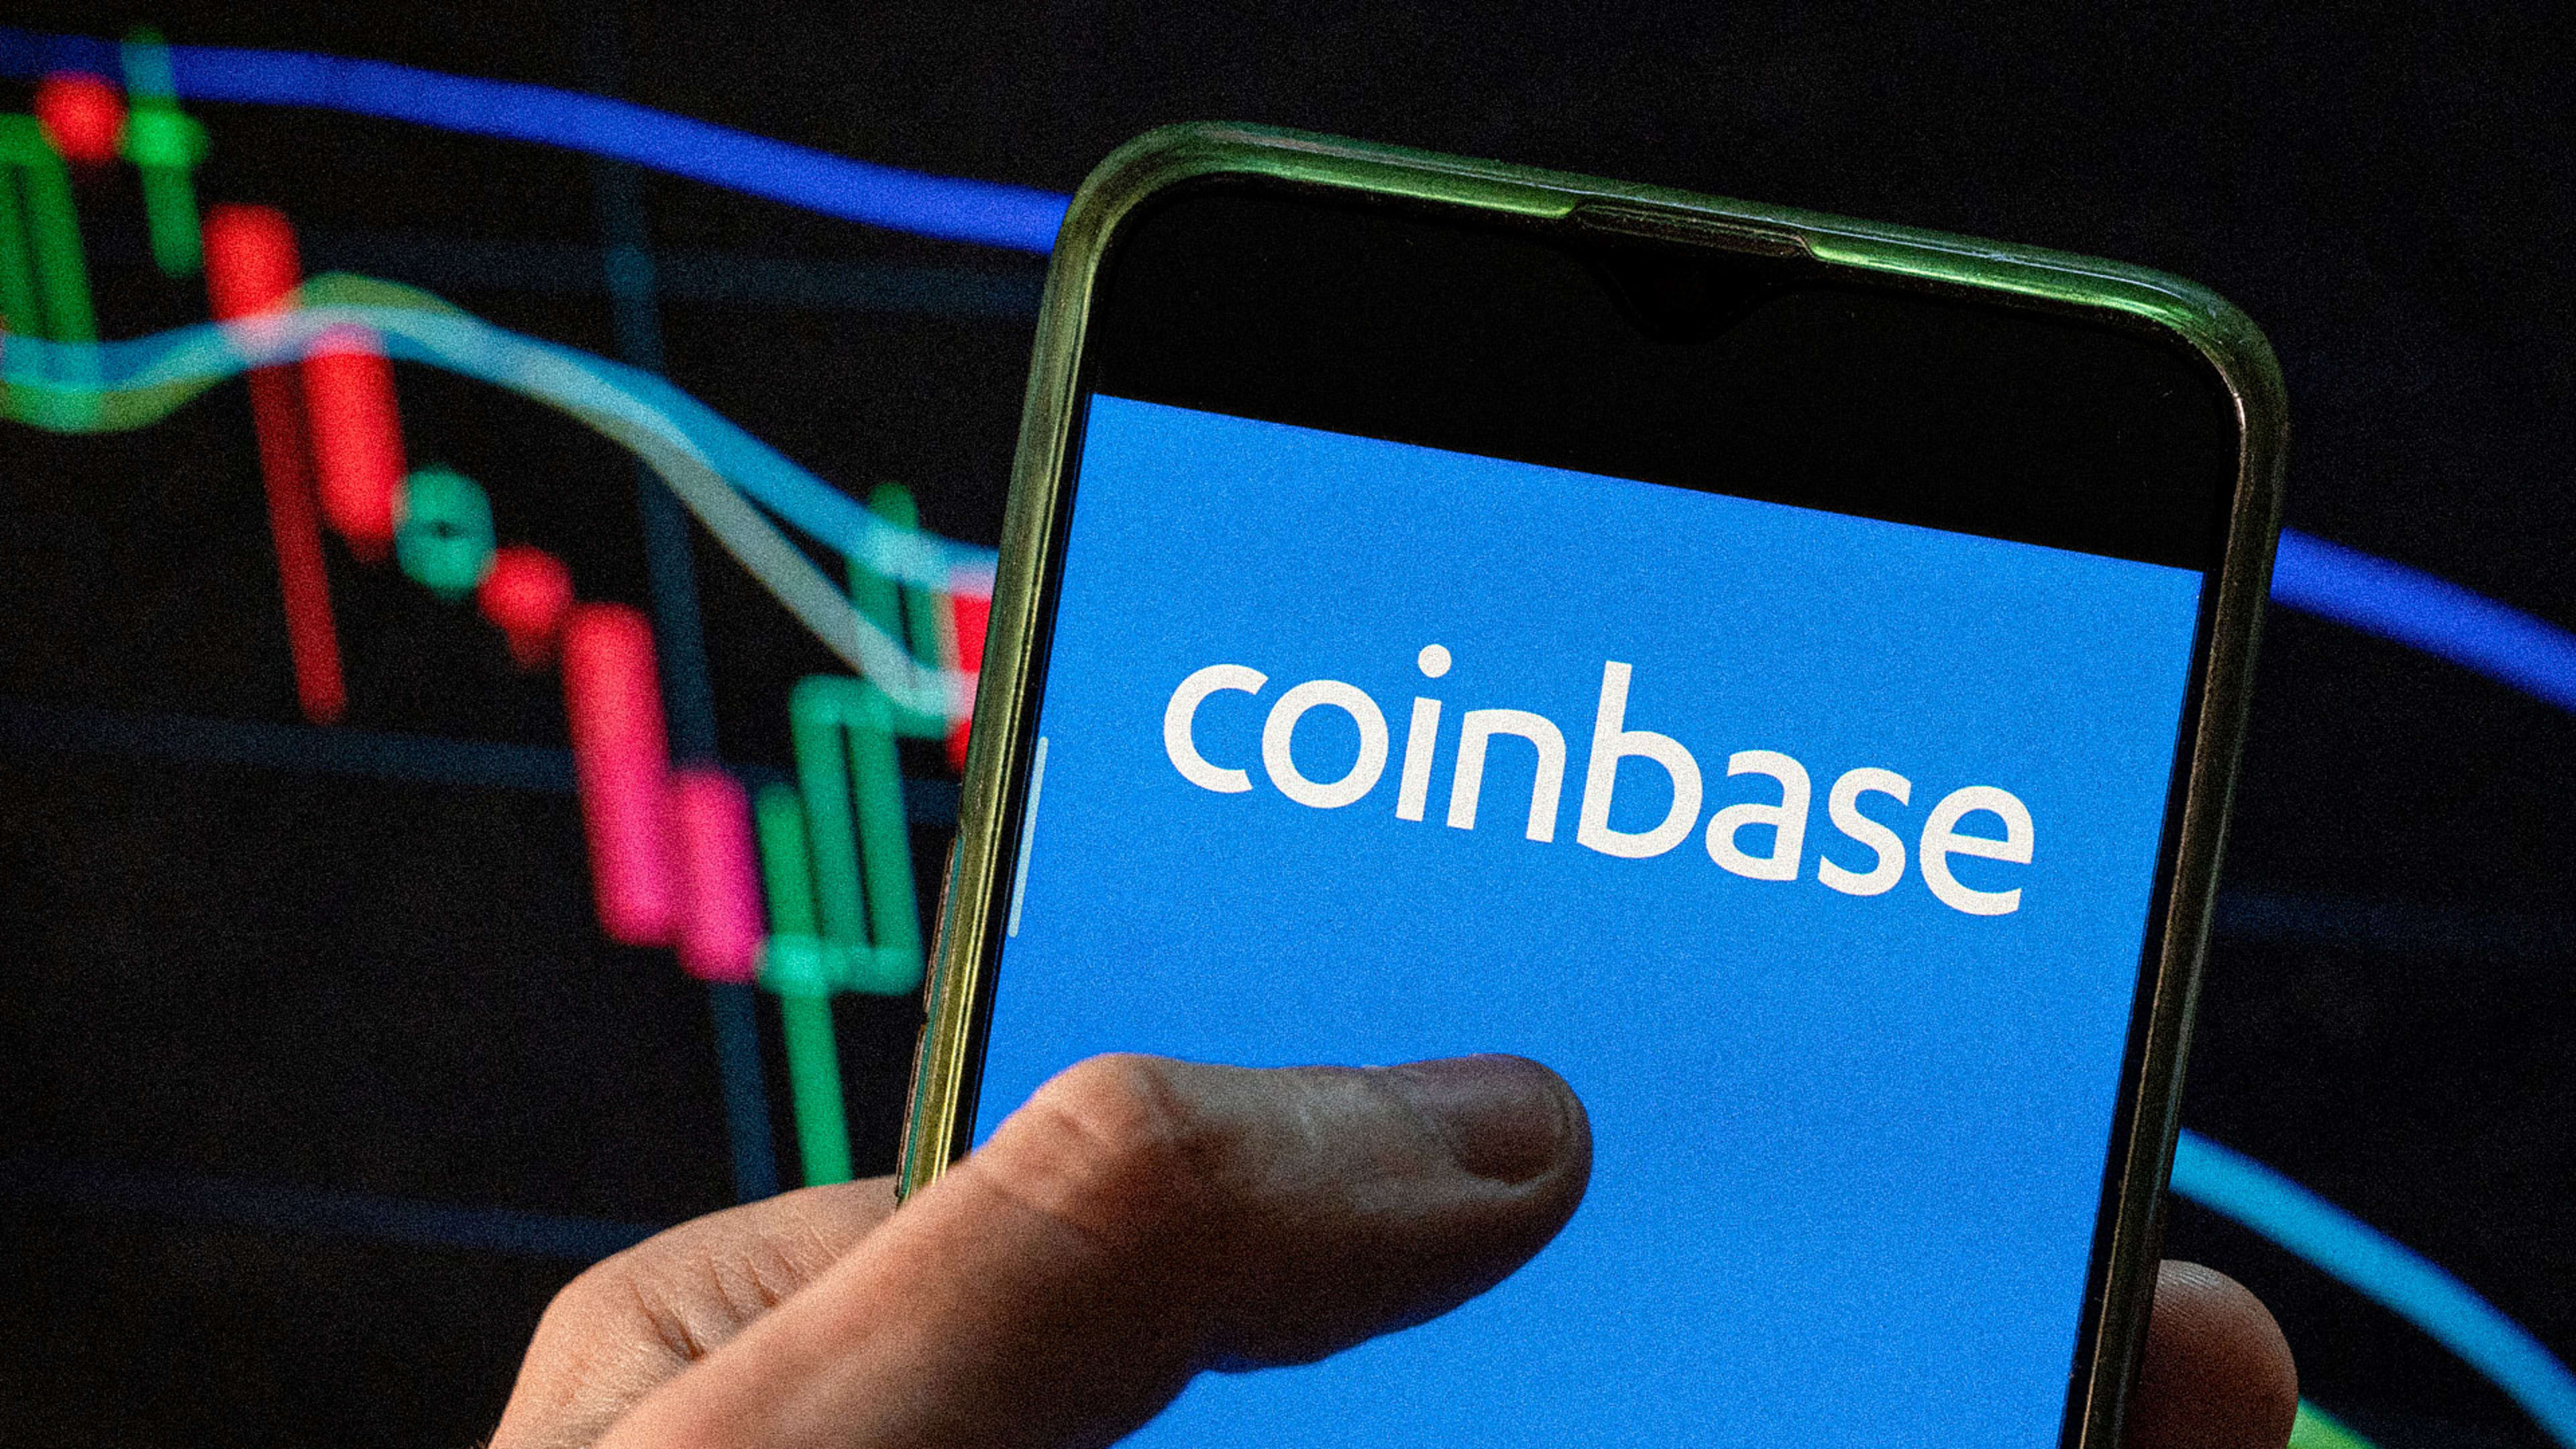 Why is Coinbase crashing? COIN stock hits all-time low as crypto trading sinks